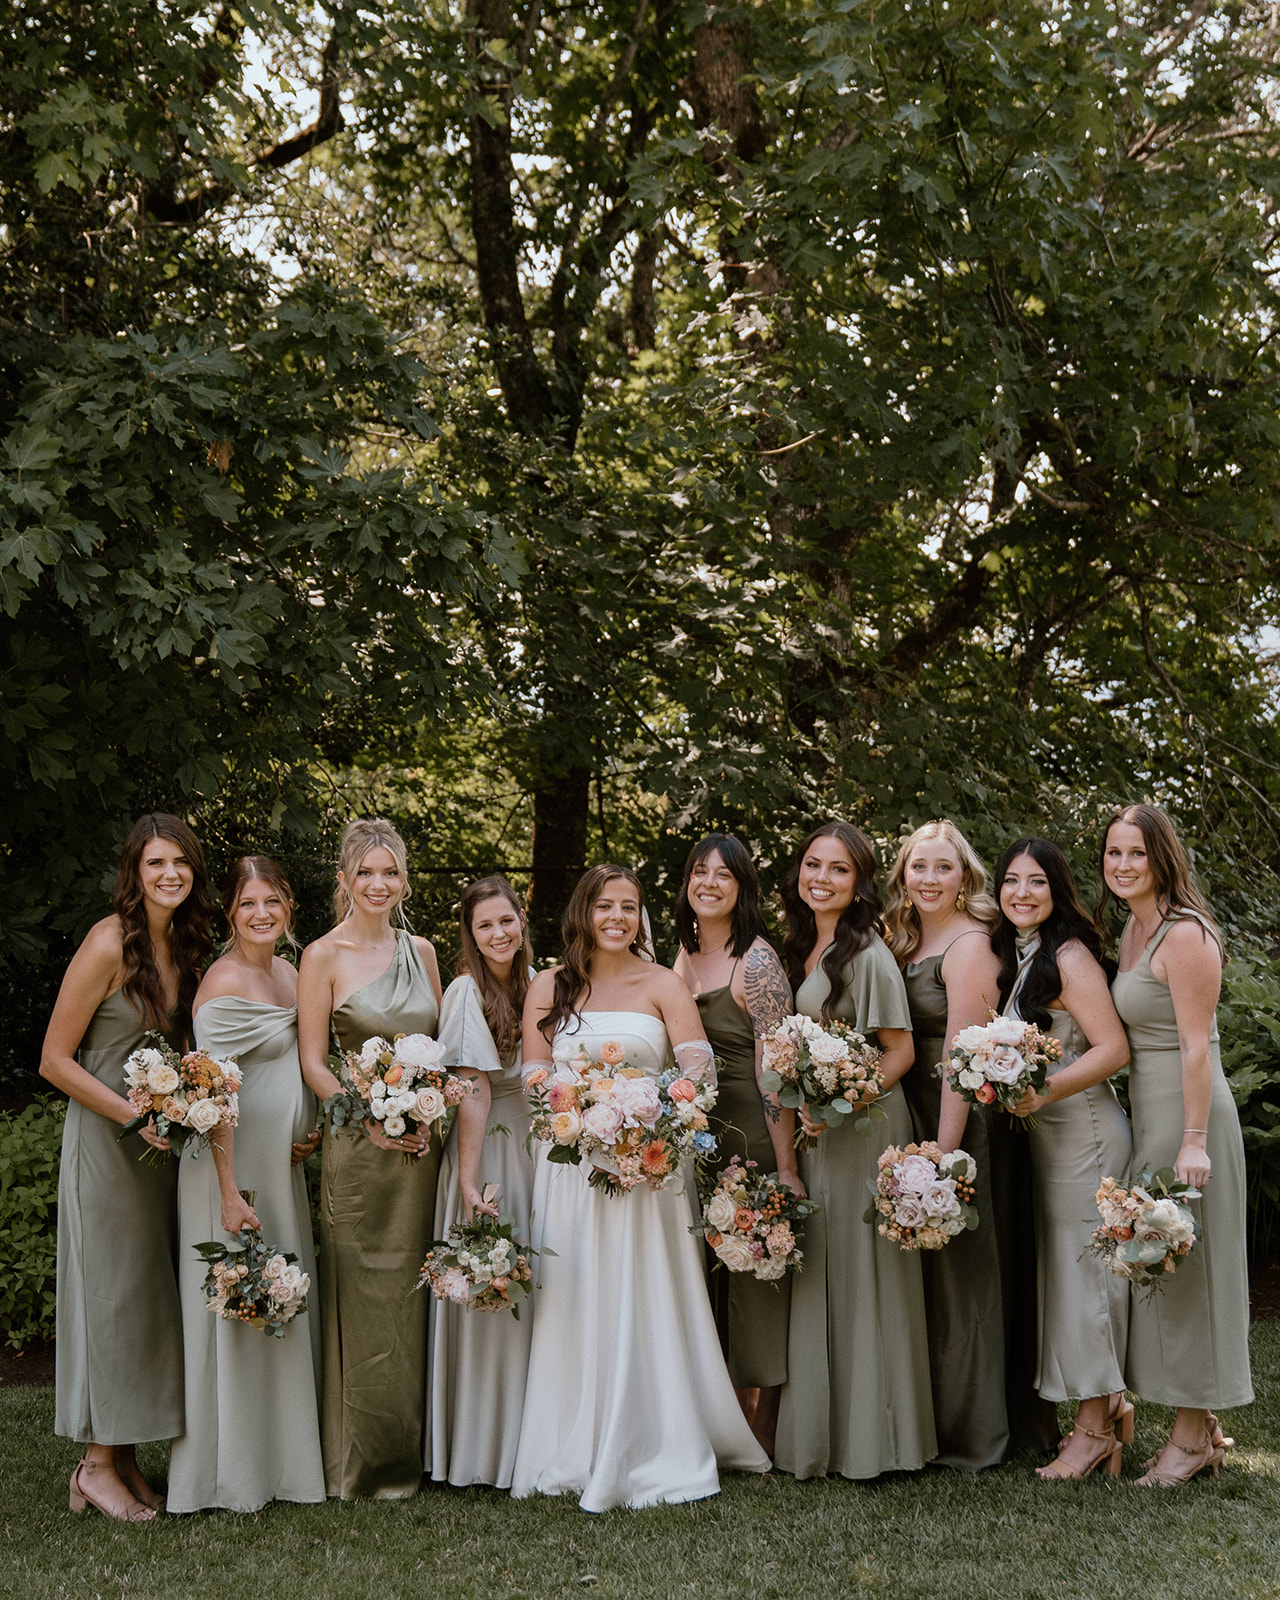 Bride and bridesmaids with mismatched sage green bridesmaid dresses